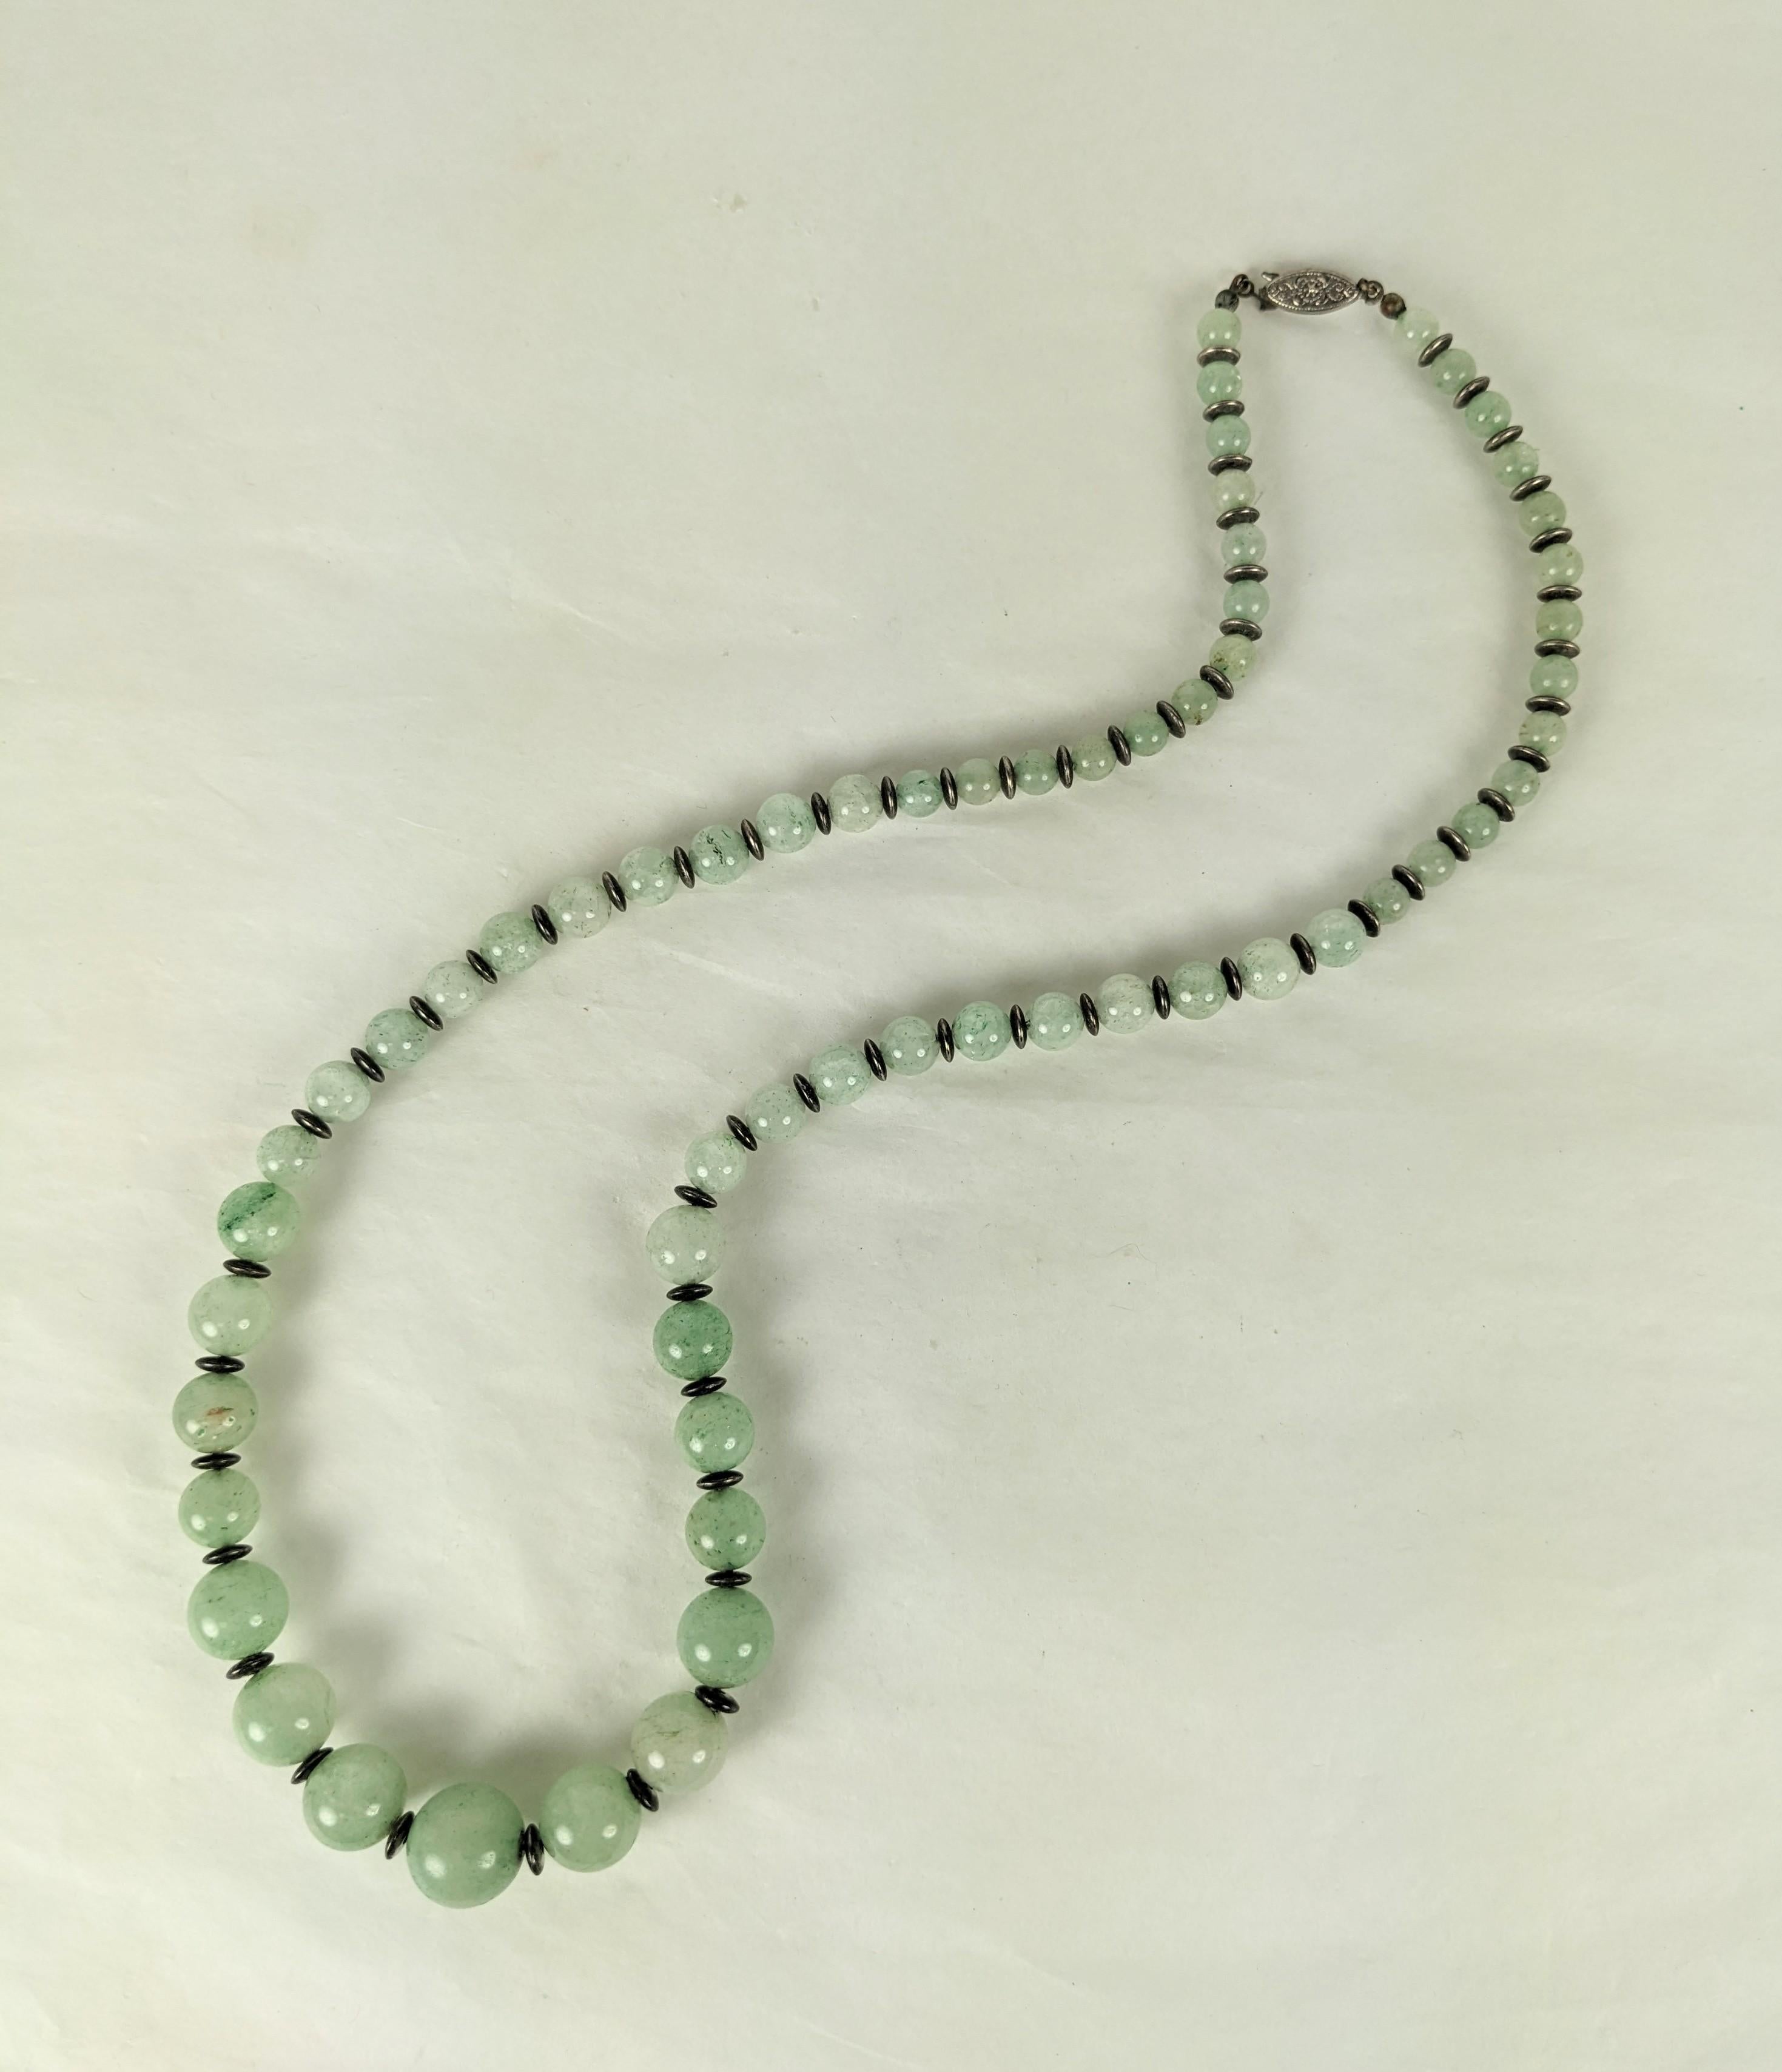 Elegant Art Deco Jade and Silver Bead Graduated Beads from the 1920's. Elegant design with graduated beads with silver disc bead connectors. 24